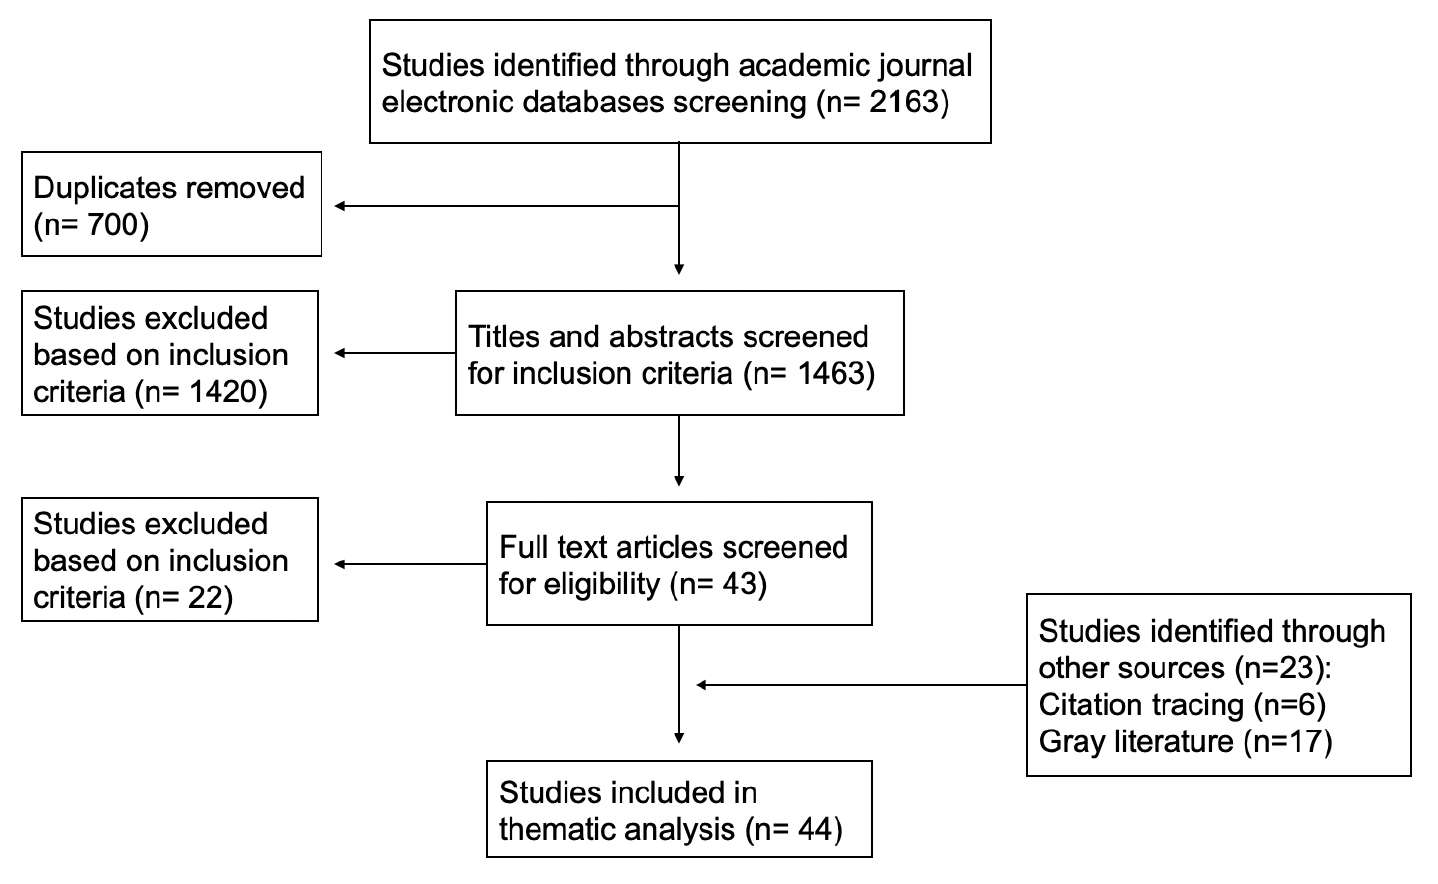 The flow diagram depicts the flow of information through the different phases of a systematic review.